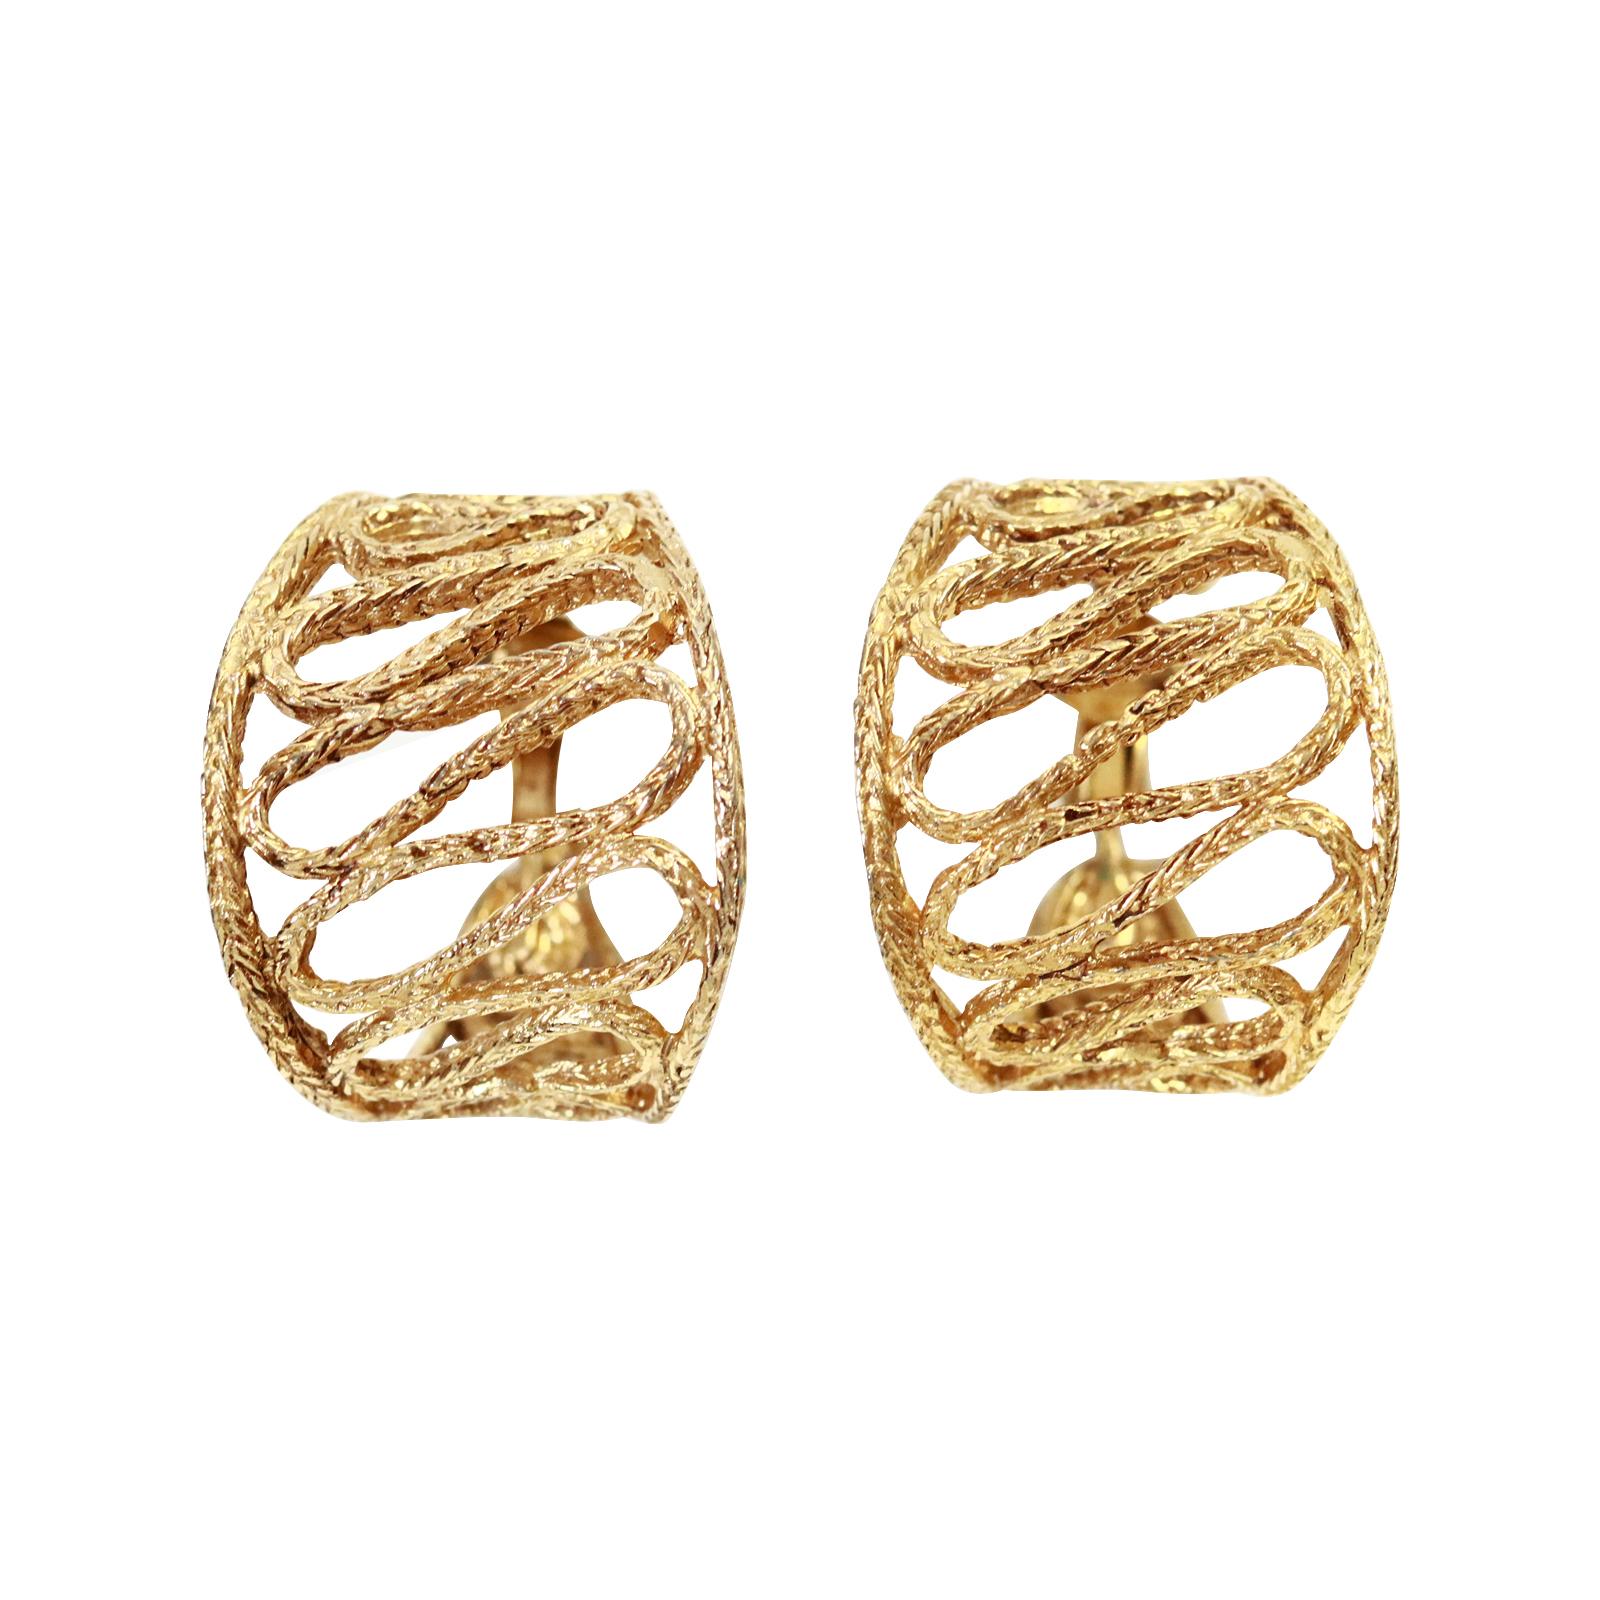 Vintage Cadoro Gold Tone Swirl  Wide Hoop Earrings Circa 1980s These are the earrings that you didn't know you needed until you try them on.  They are so special.  Substantial and well made. I have always liked Cadoro and I know they made some